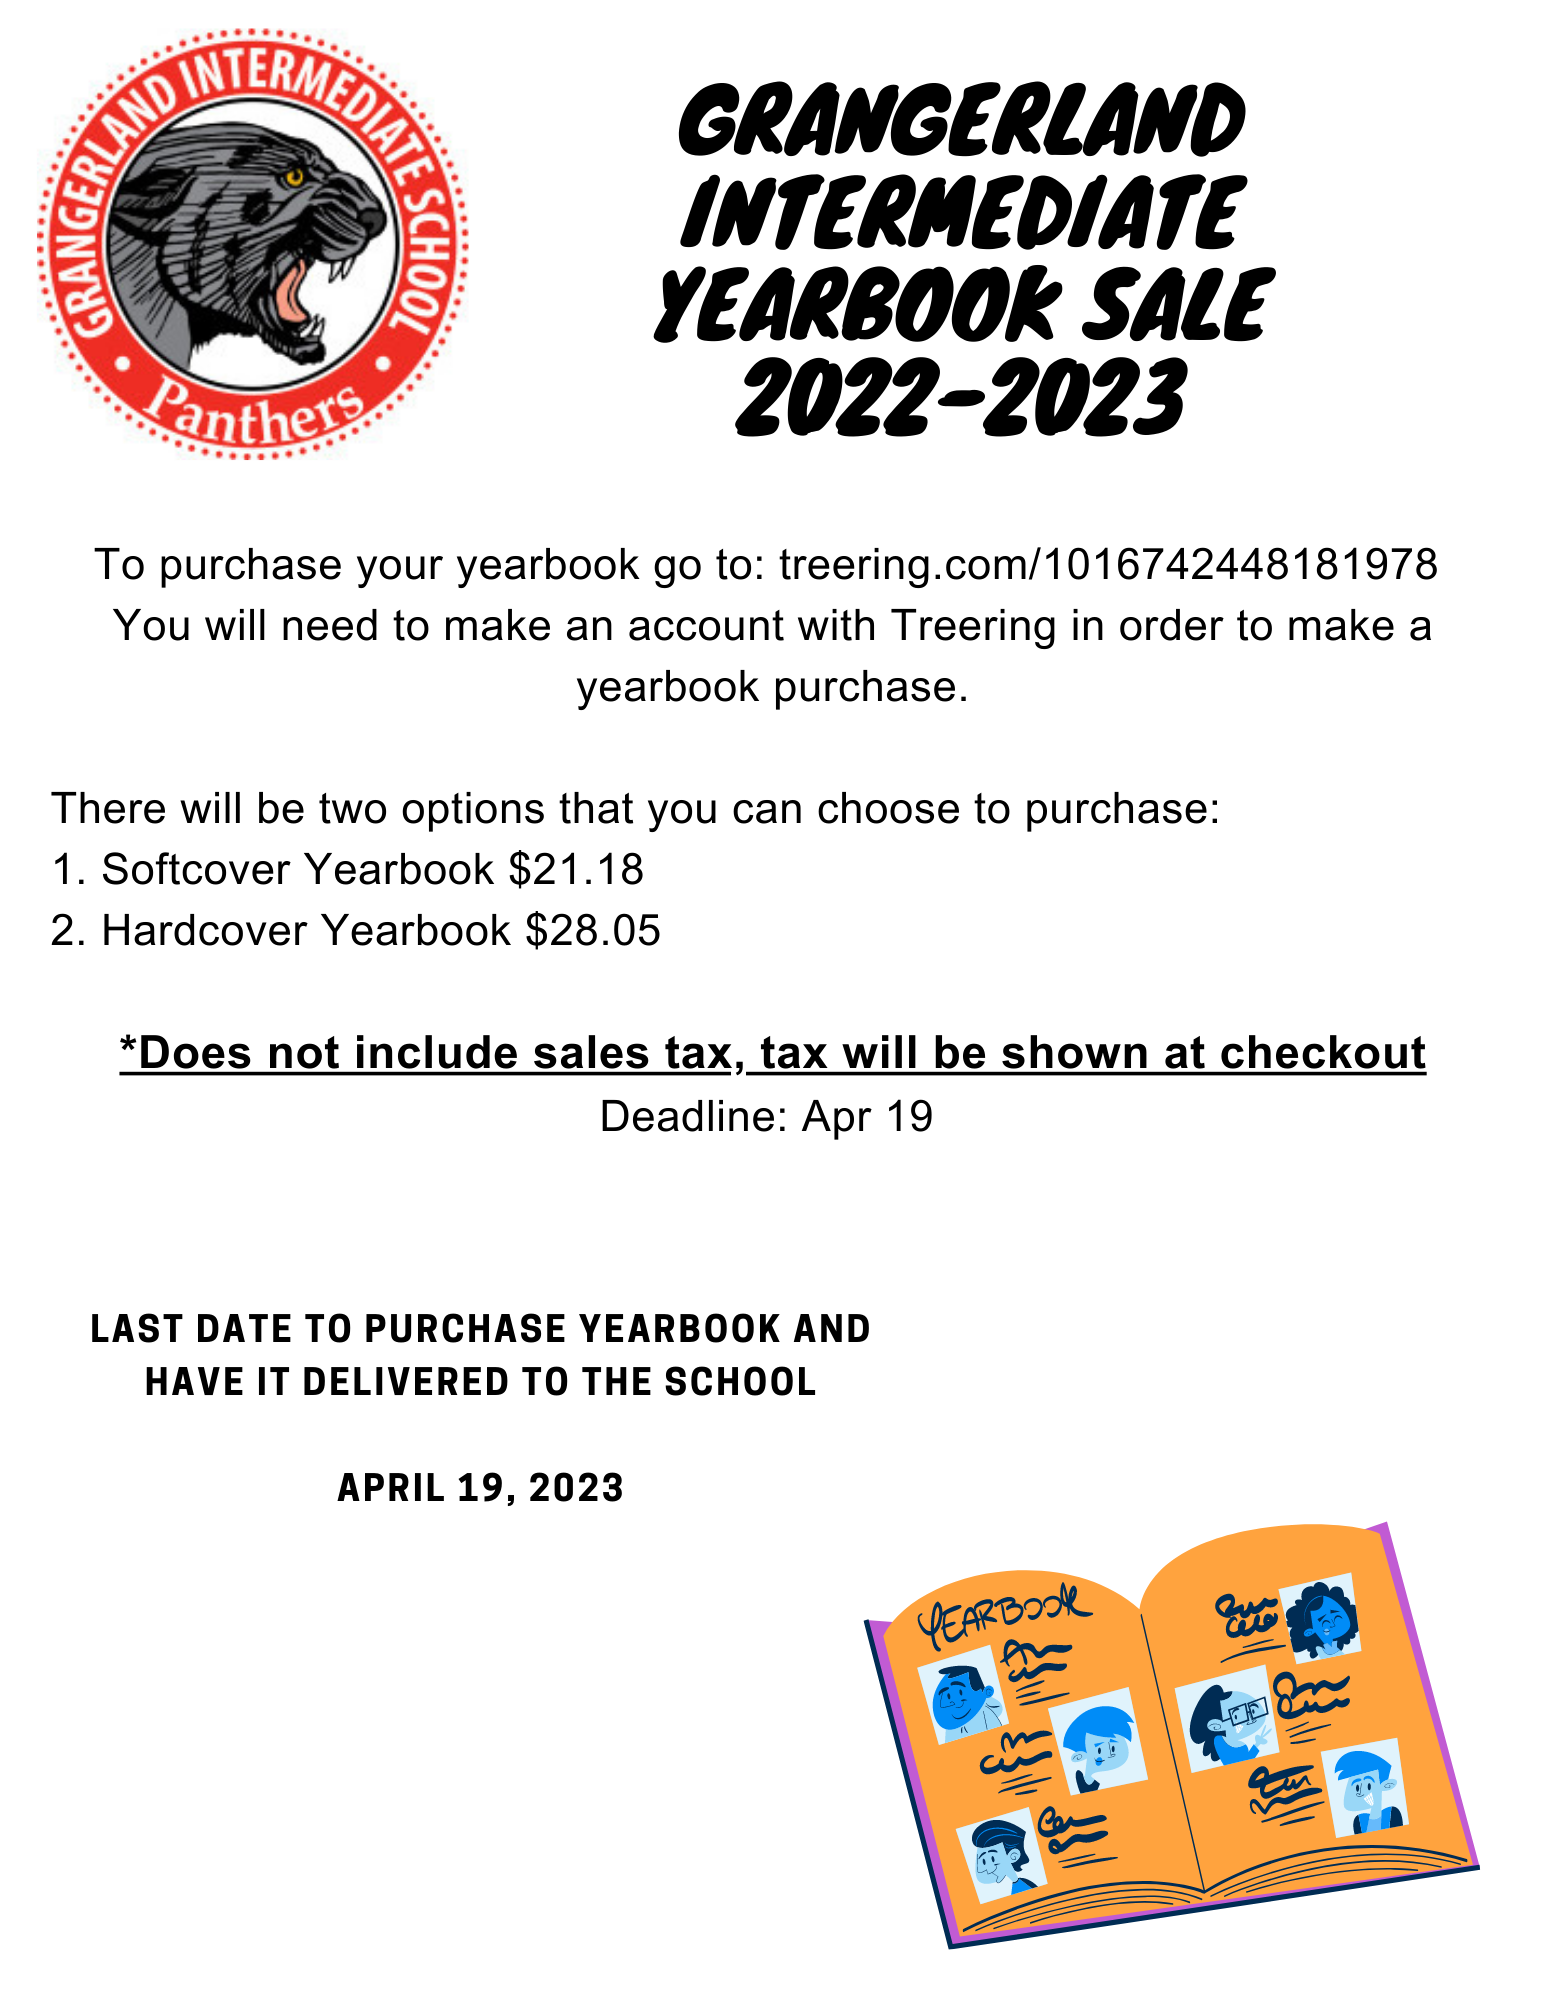 How to order a 2023-2023 year book